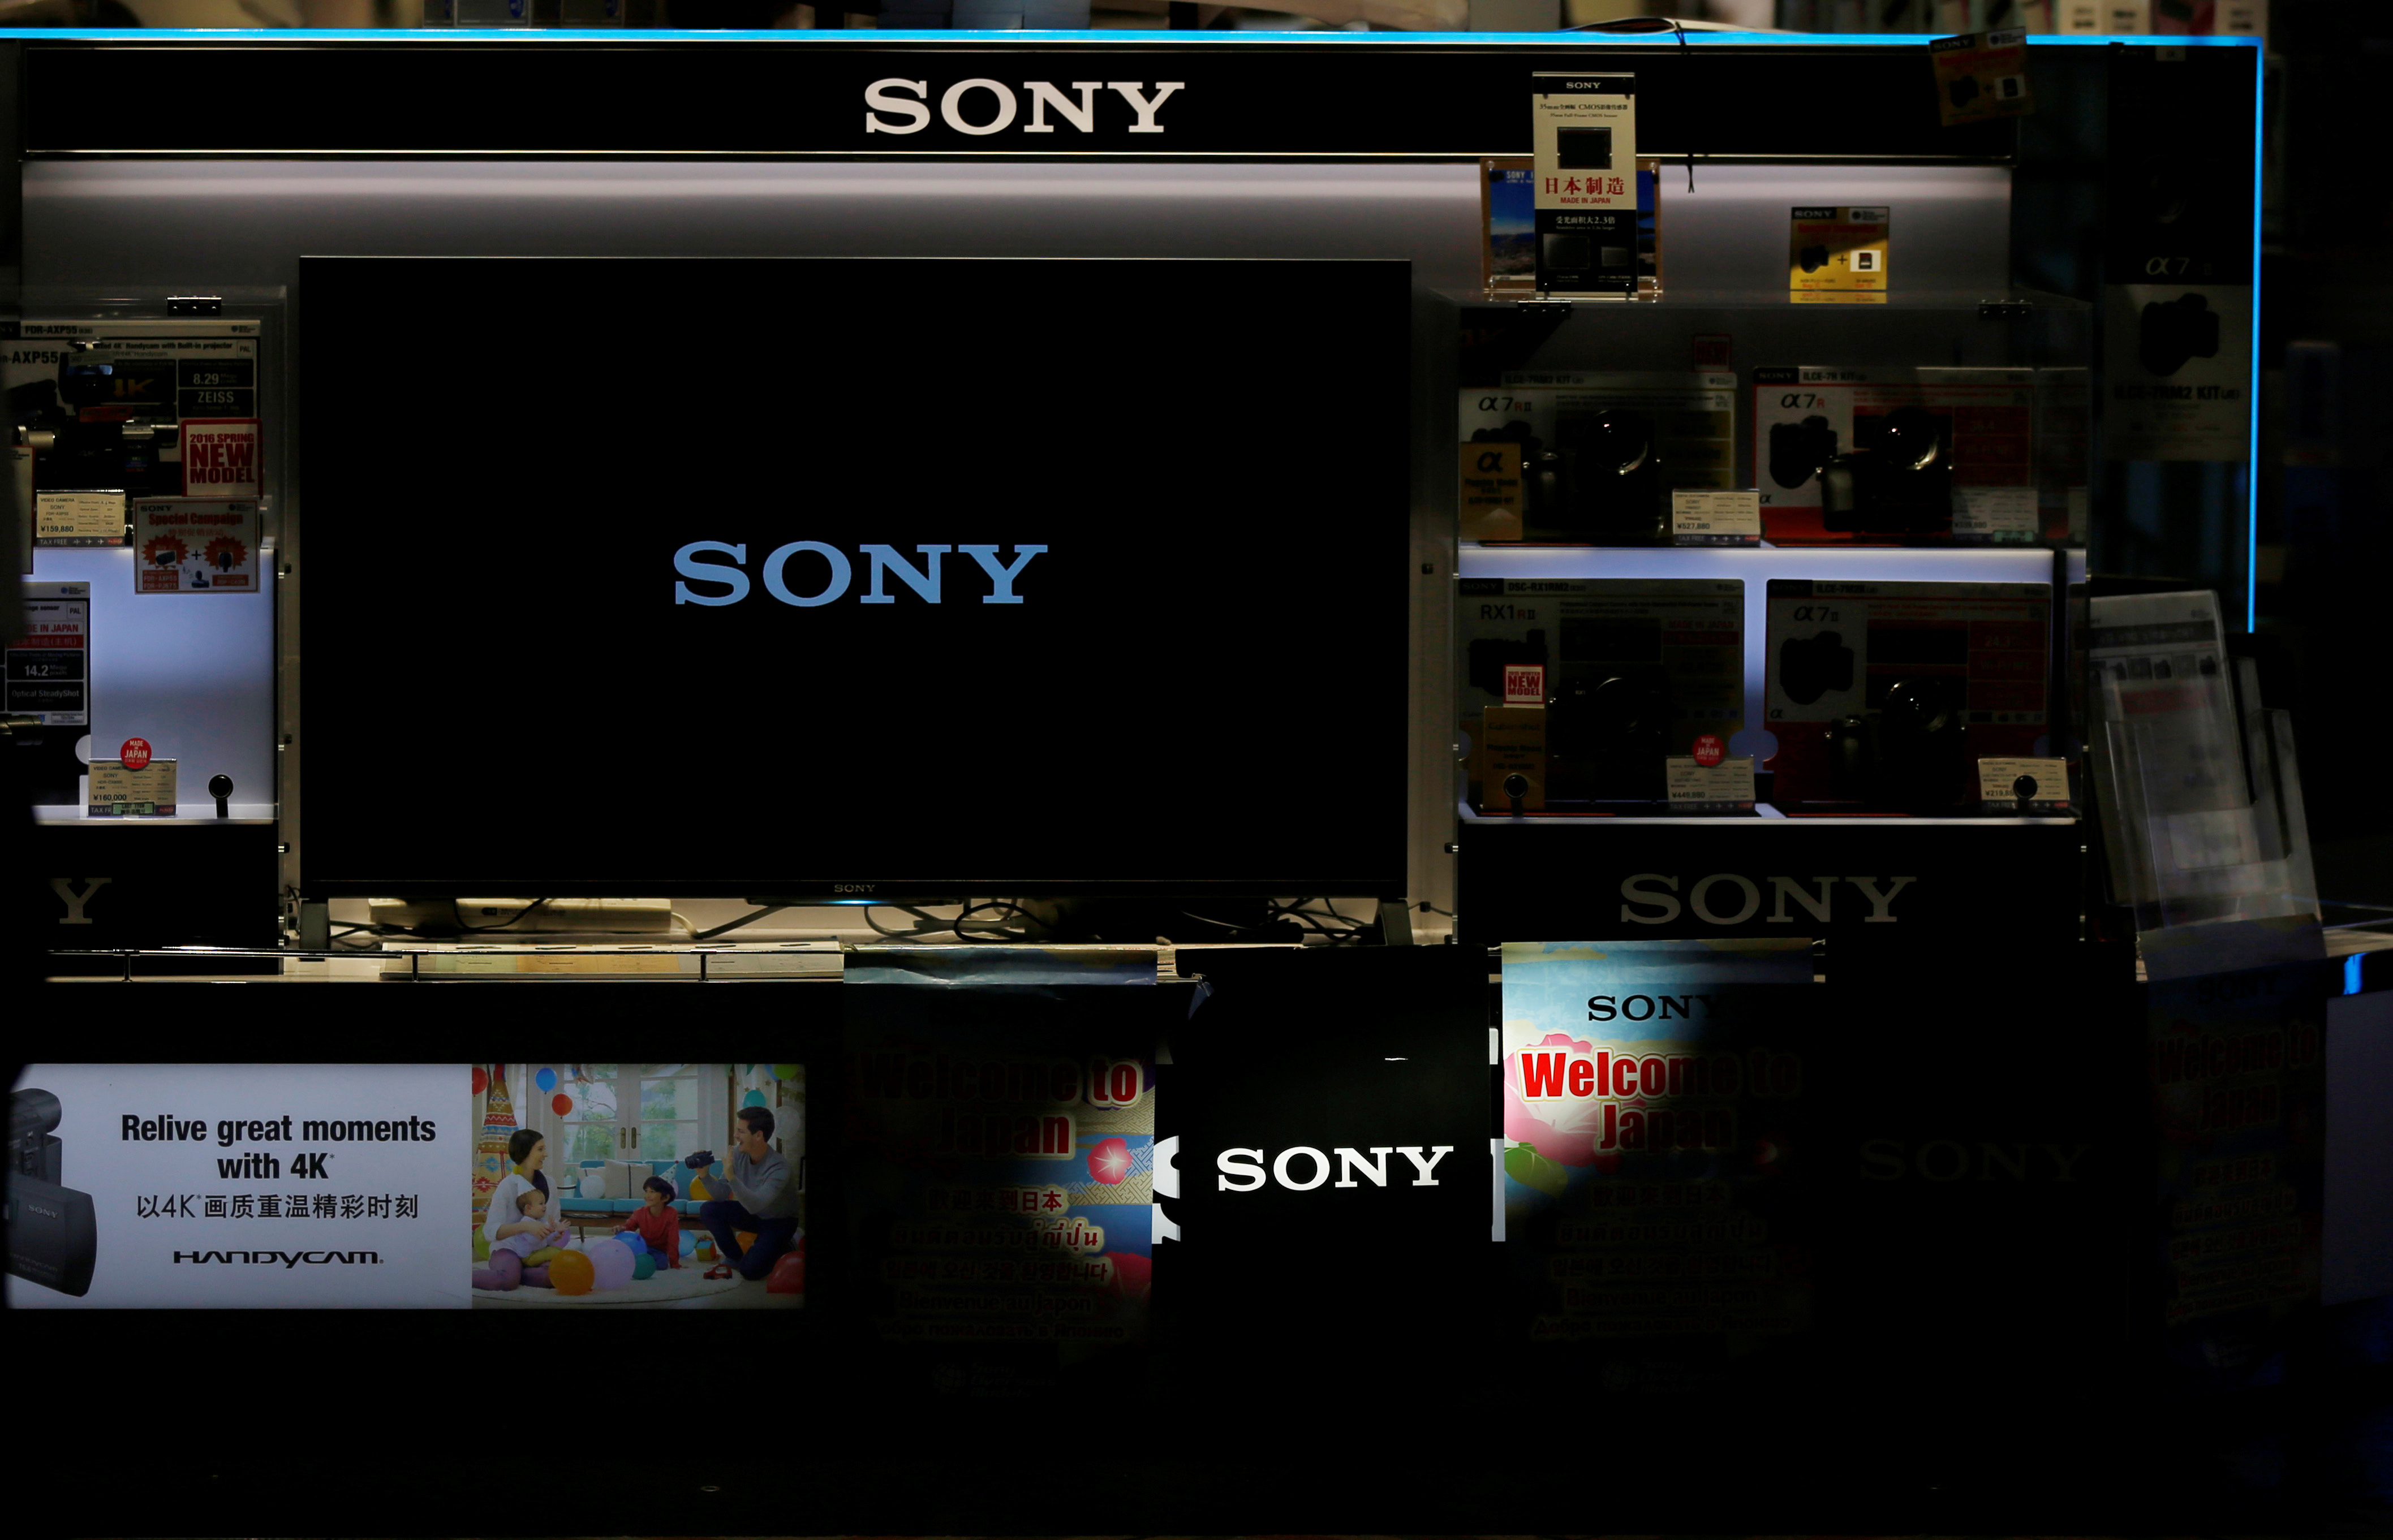 Logos of Sony Corp are seen at an electronics store in Narita International airport in Narita